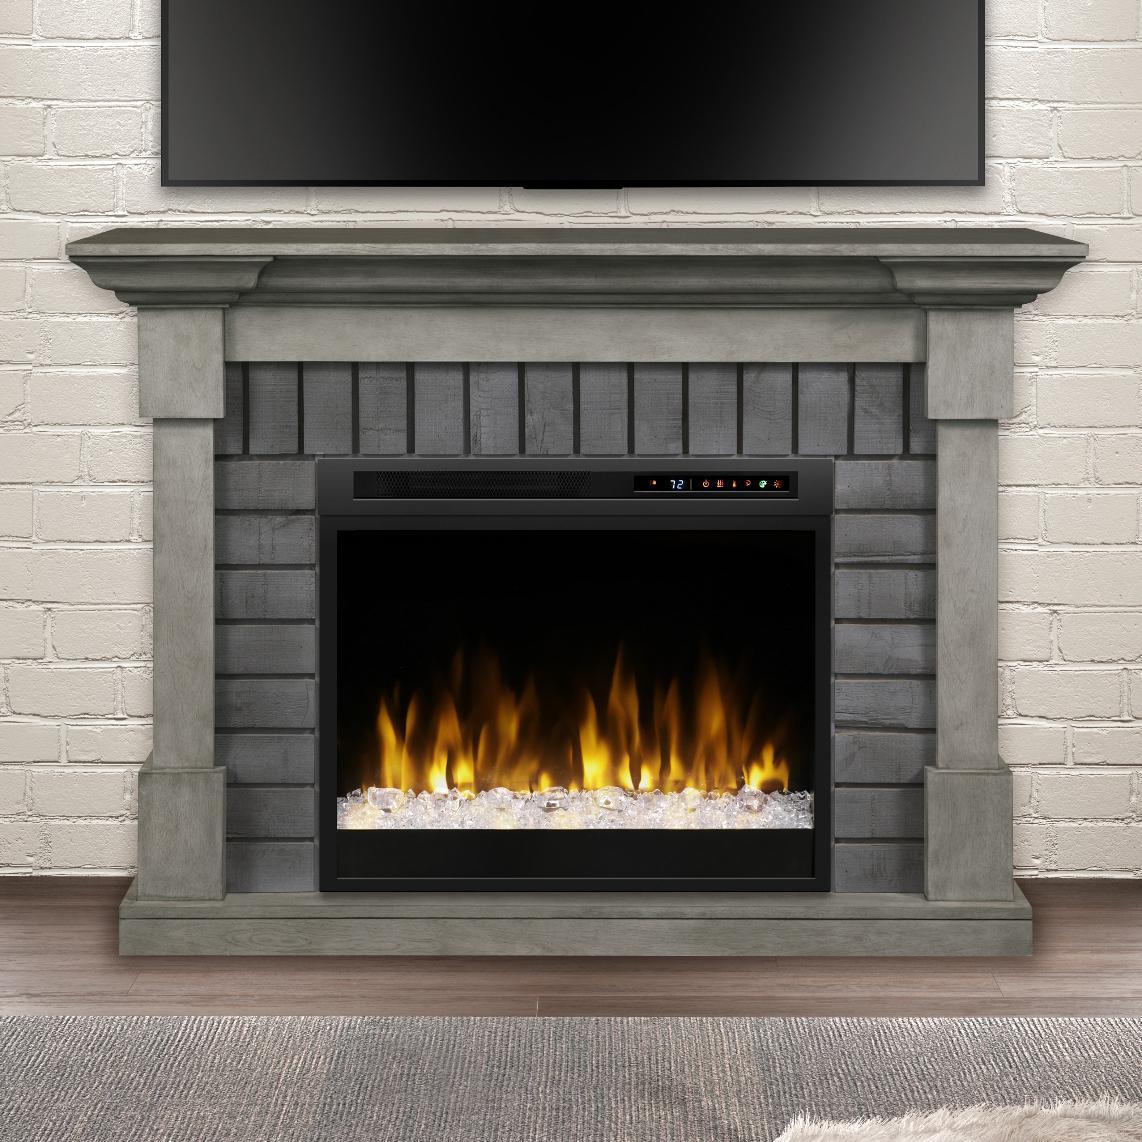 Small White Electric Fireplace Luxury Dimplex Royce 52" Electric Fireplace Mantel Glass Ember